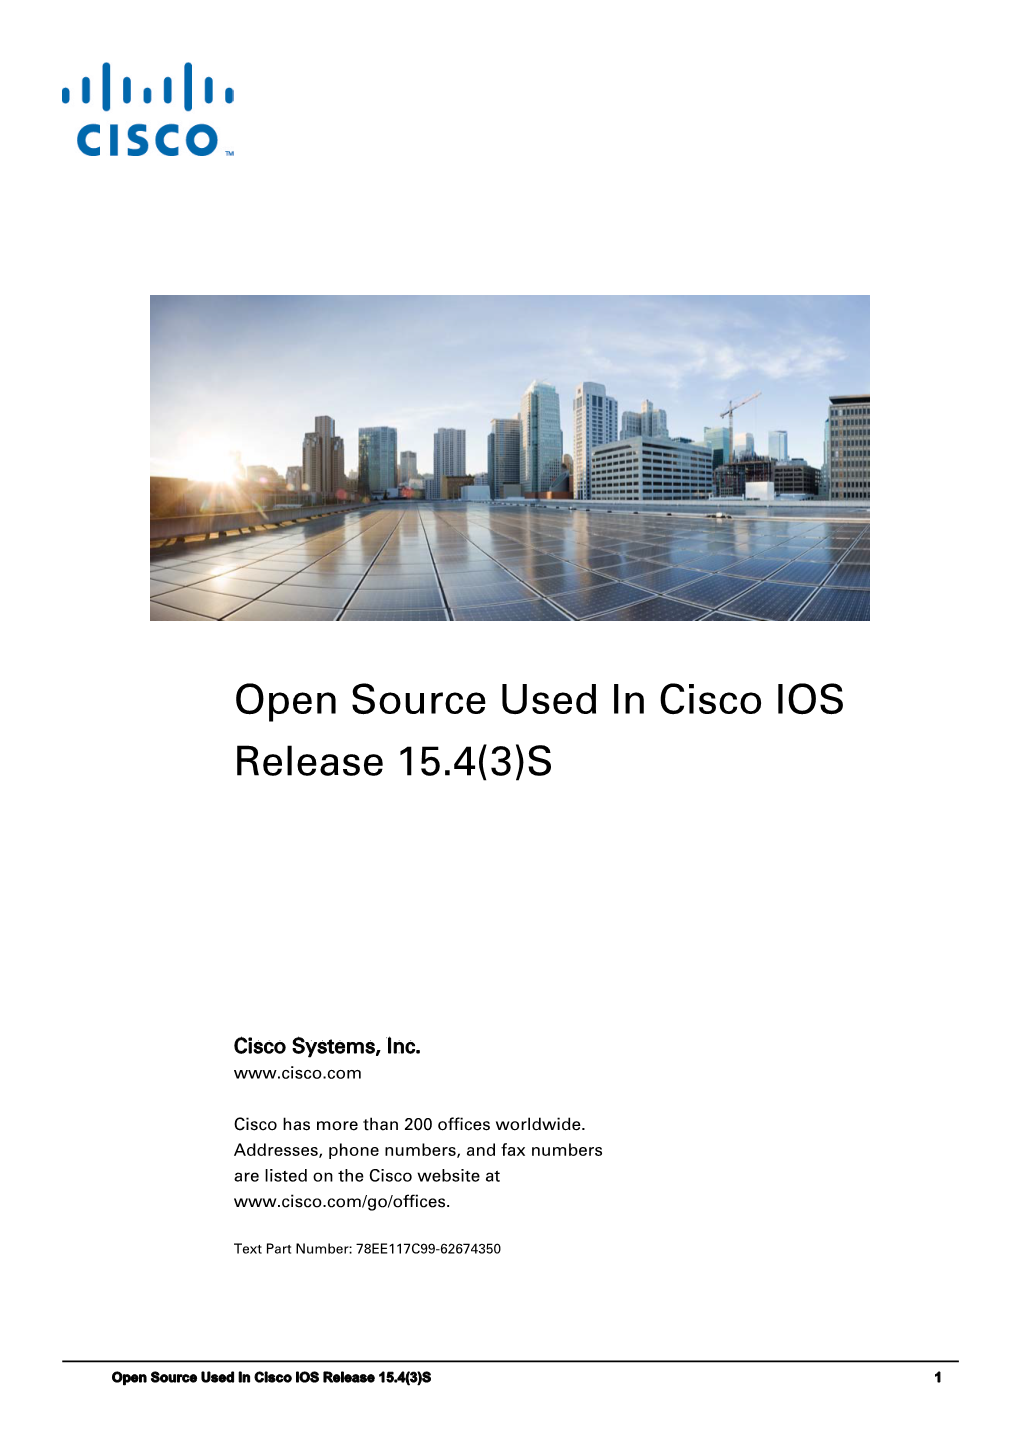 Open Source Licensing Information for Cisco IOS Release 15.4(3)S